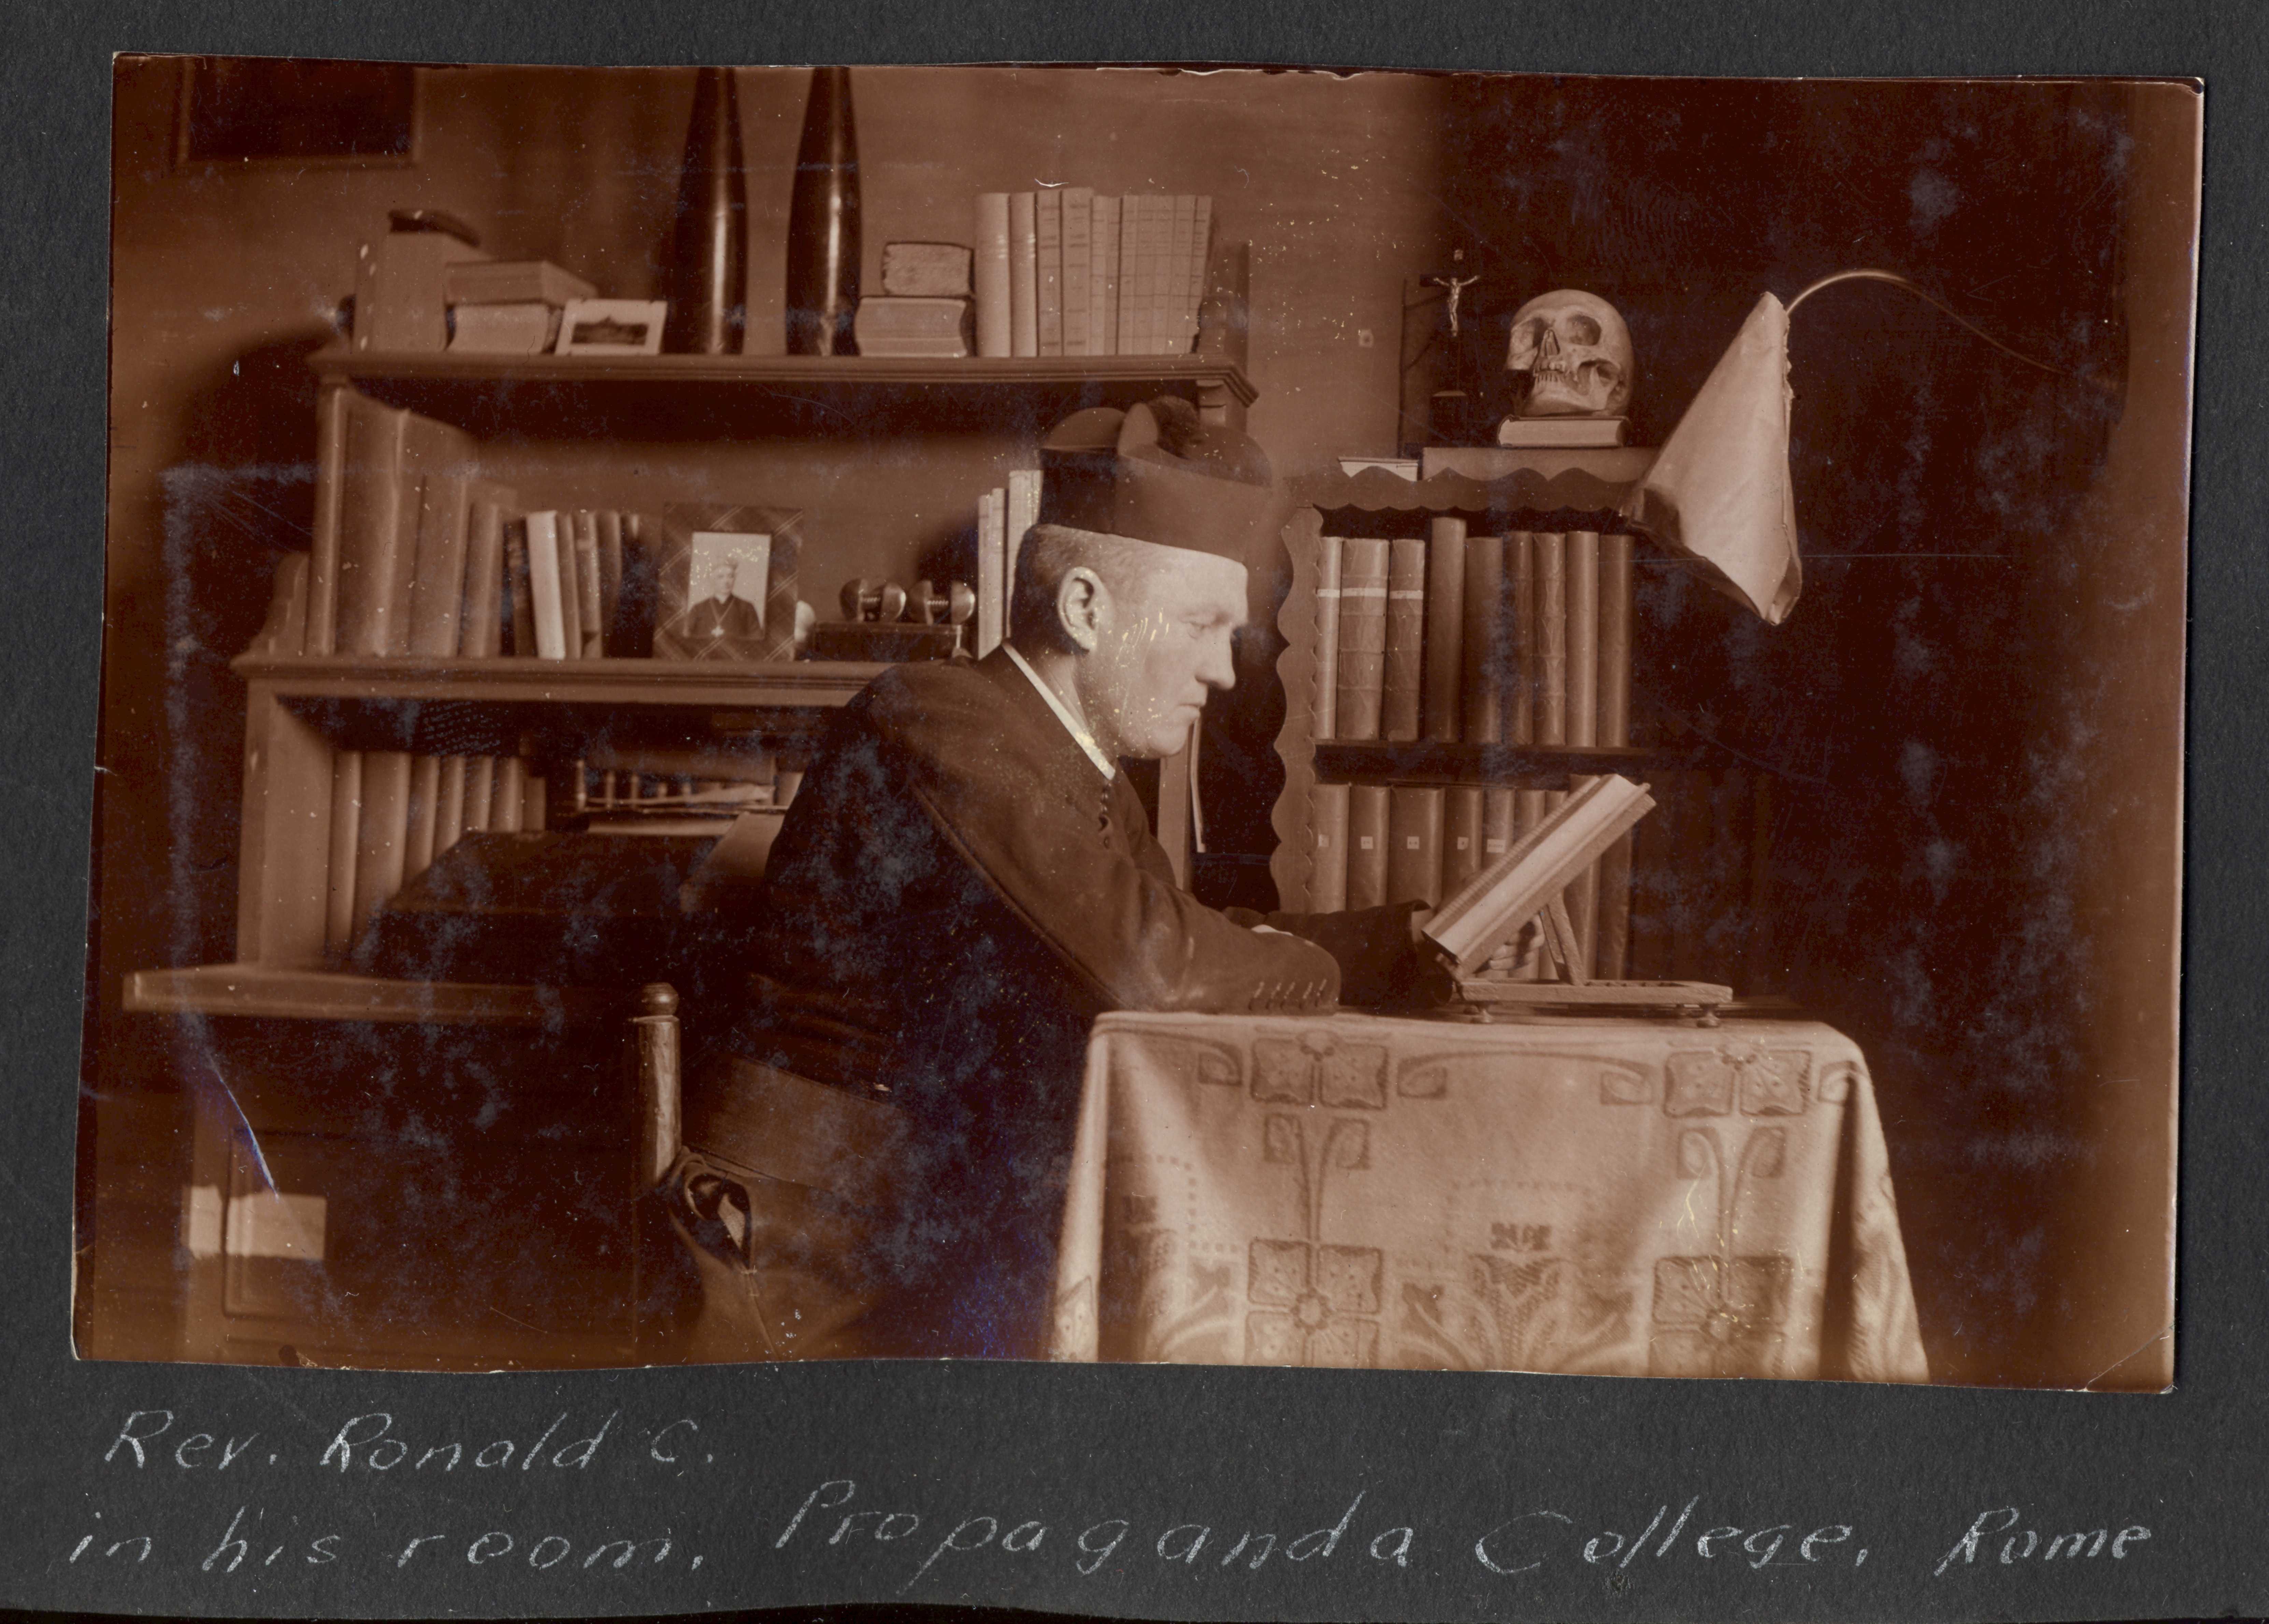 Black and white photograph. RC MacGillivray is shown from the side, sitting at a table covered in a long, embroidered cloth, reading from a book. There are book shelves behind him. He is wearing a dark uniform and a hat.